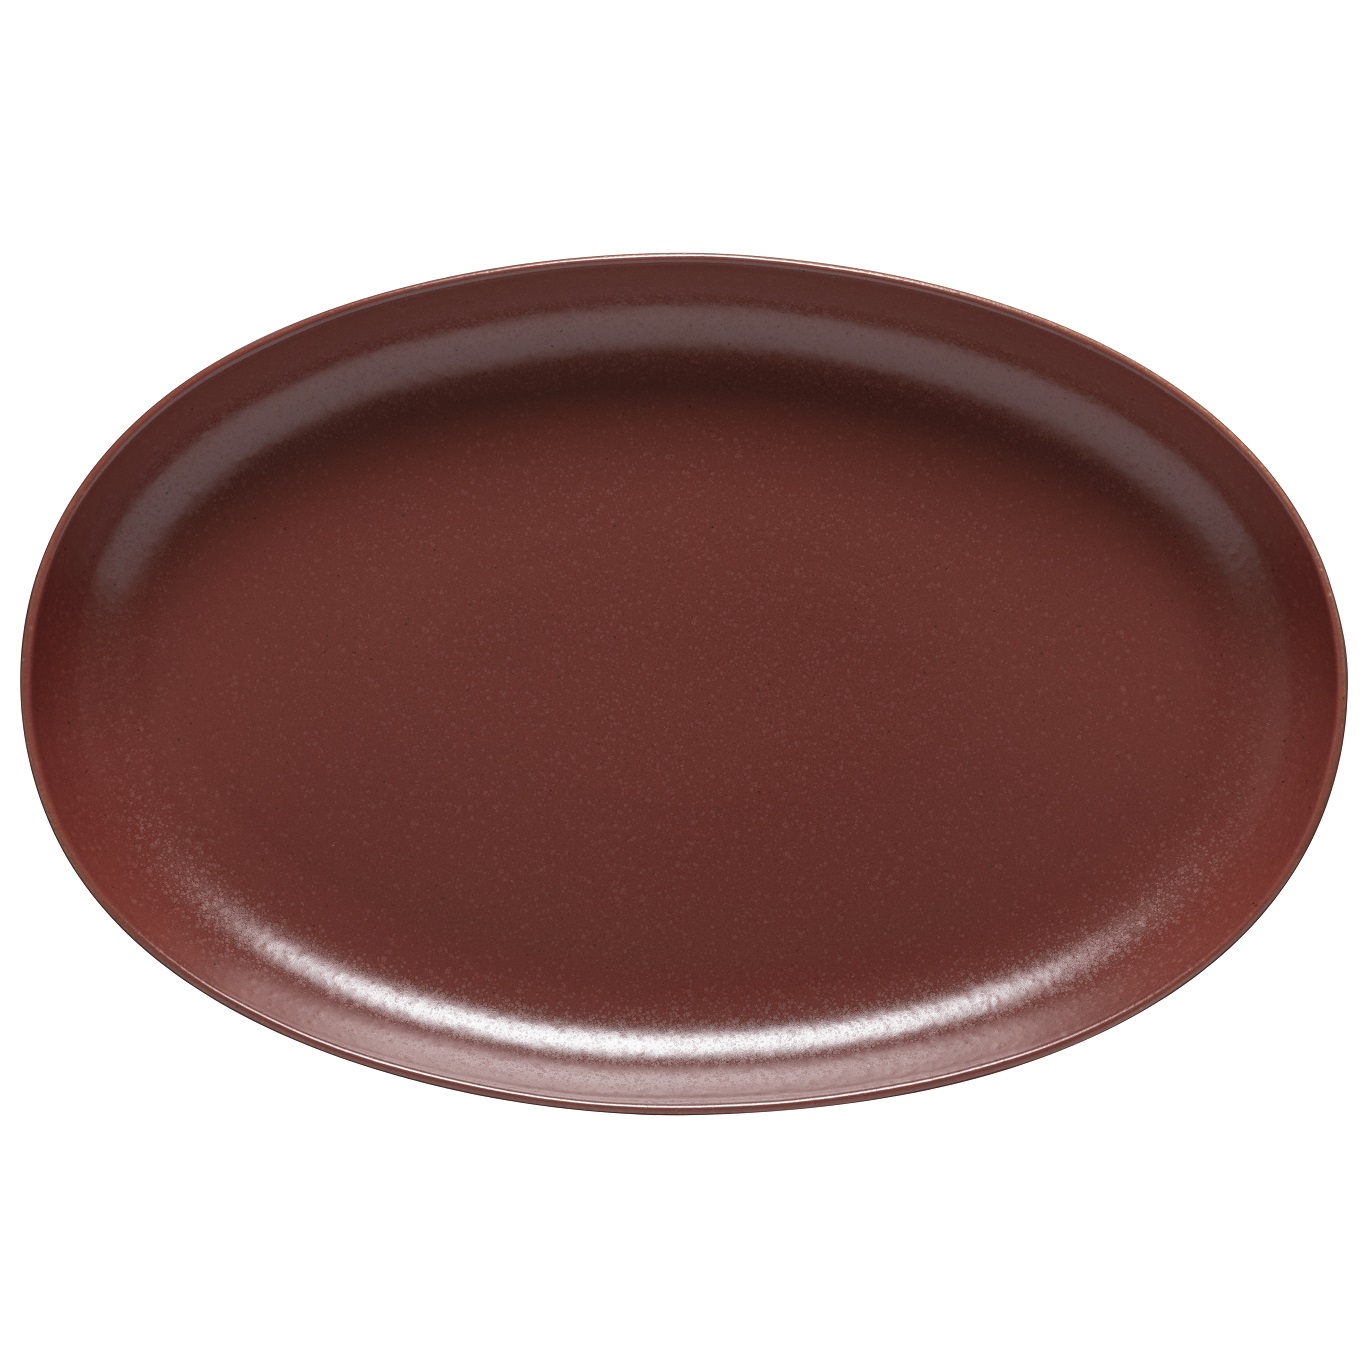 Pacifica Cayenne Oval Platter 40.8cm Gift